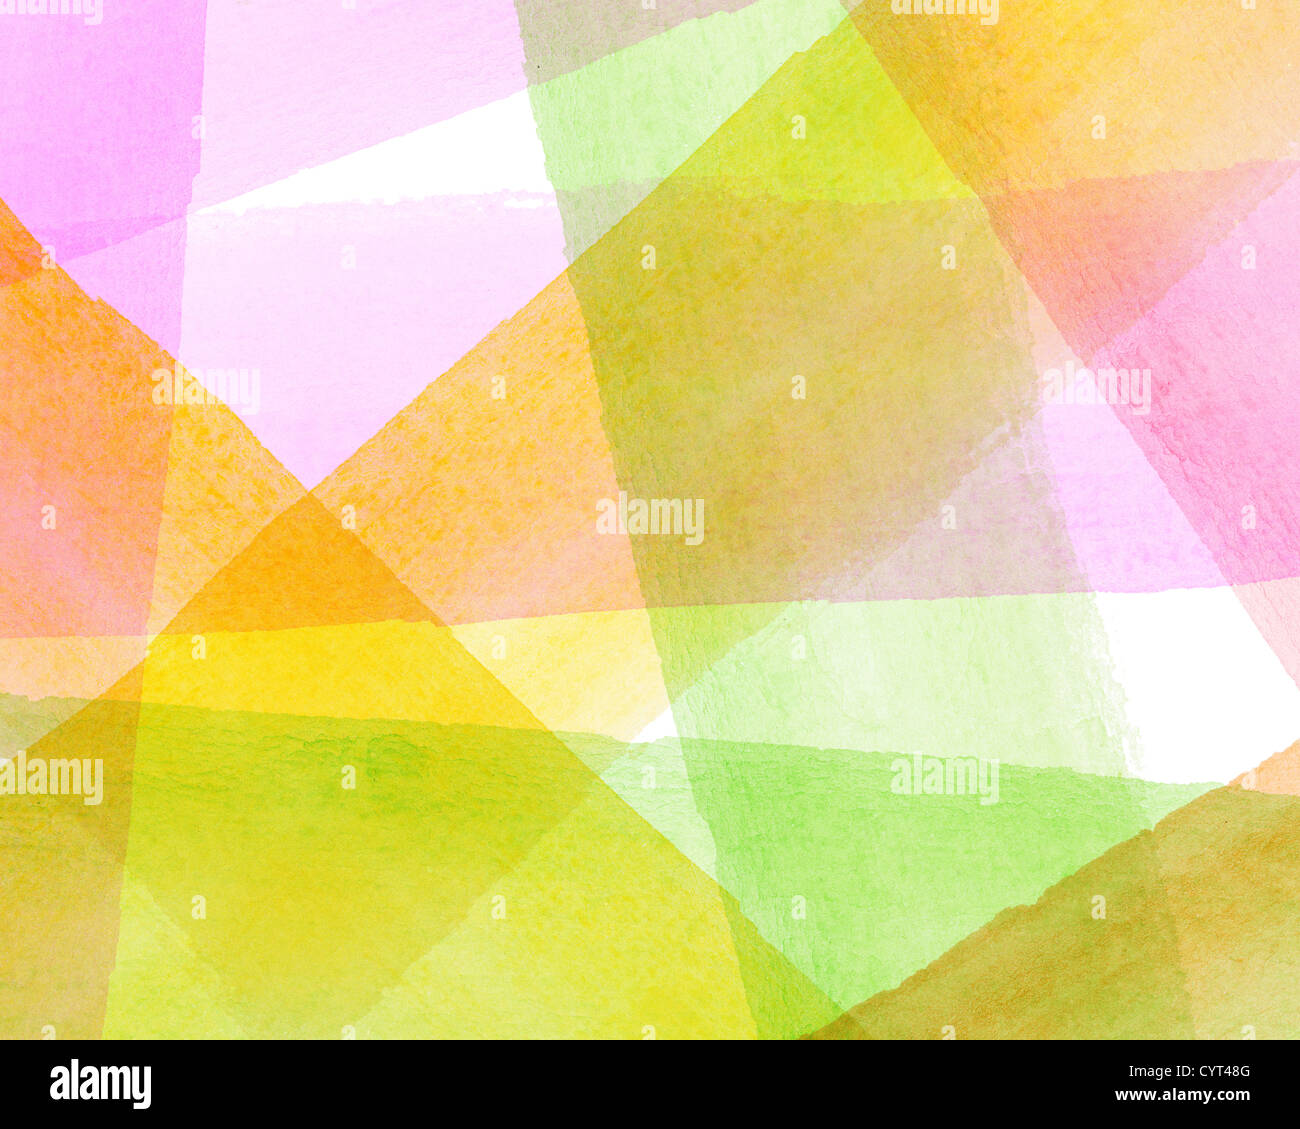 Designed abstract background Stock Photo